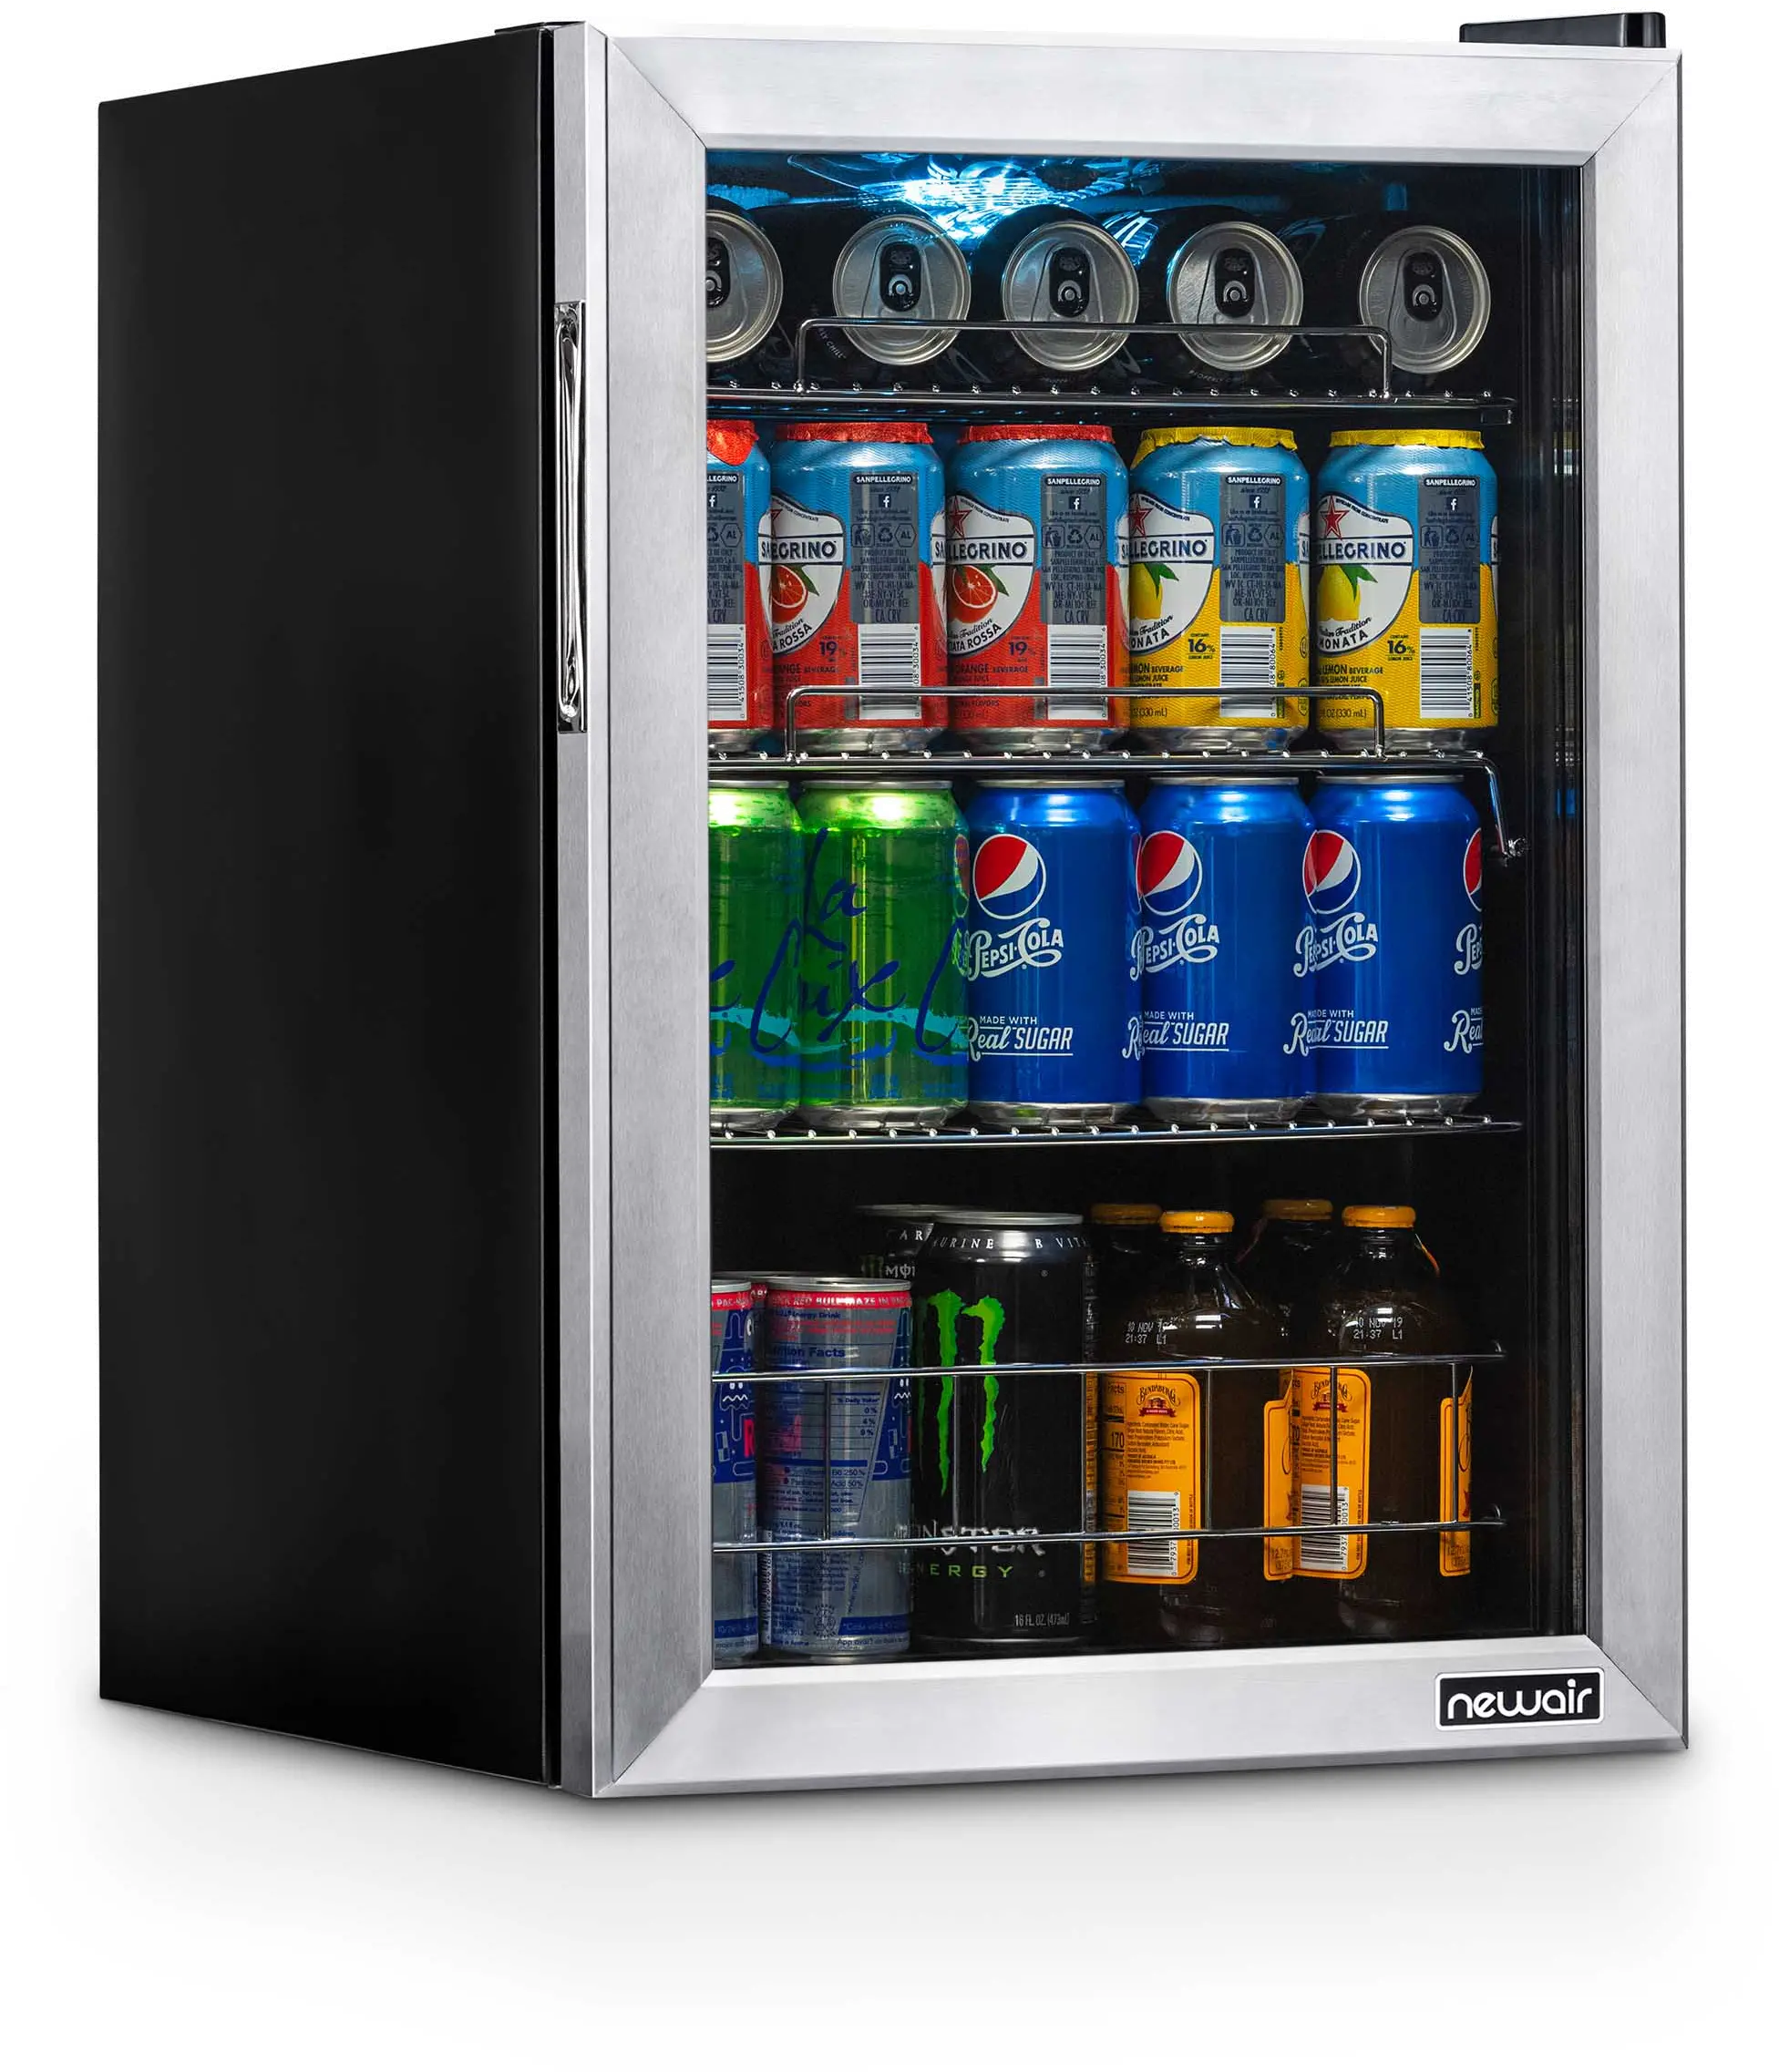 Photos - Fridge NewAir Stainless Steel 84 Can Beverage Cooler AB-850 